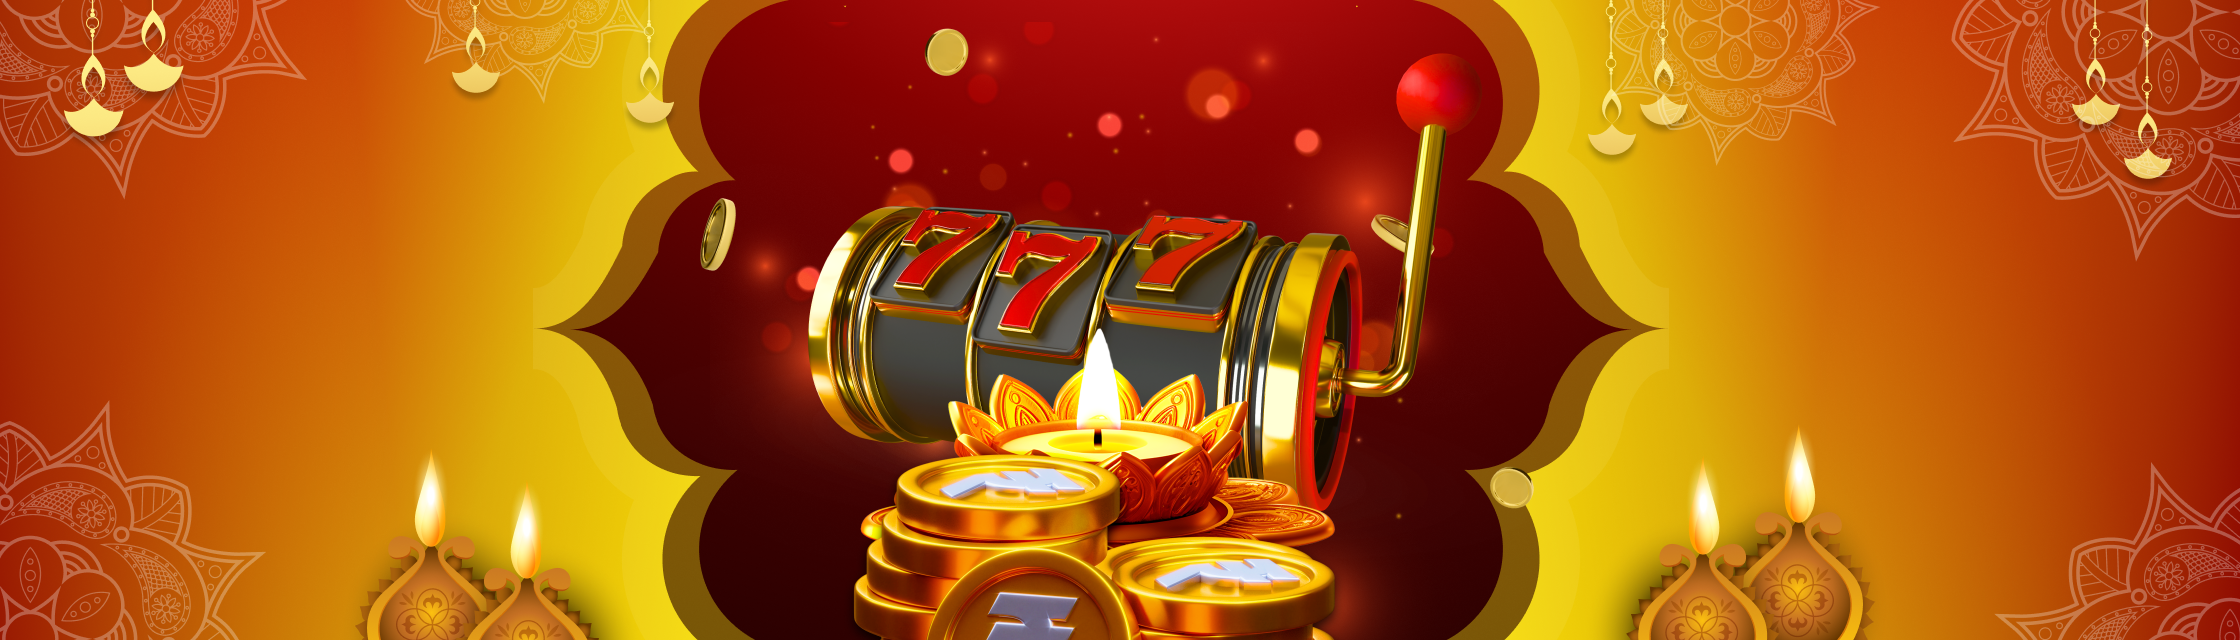 Promo banner of the Parimatch with slot, coins and candles on the yellow background